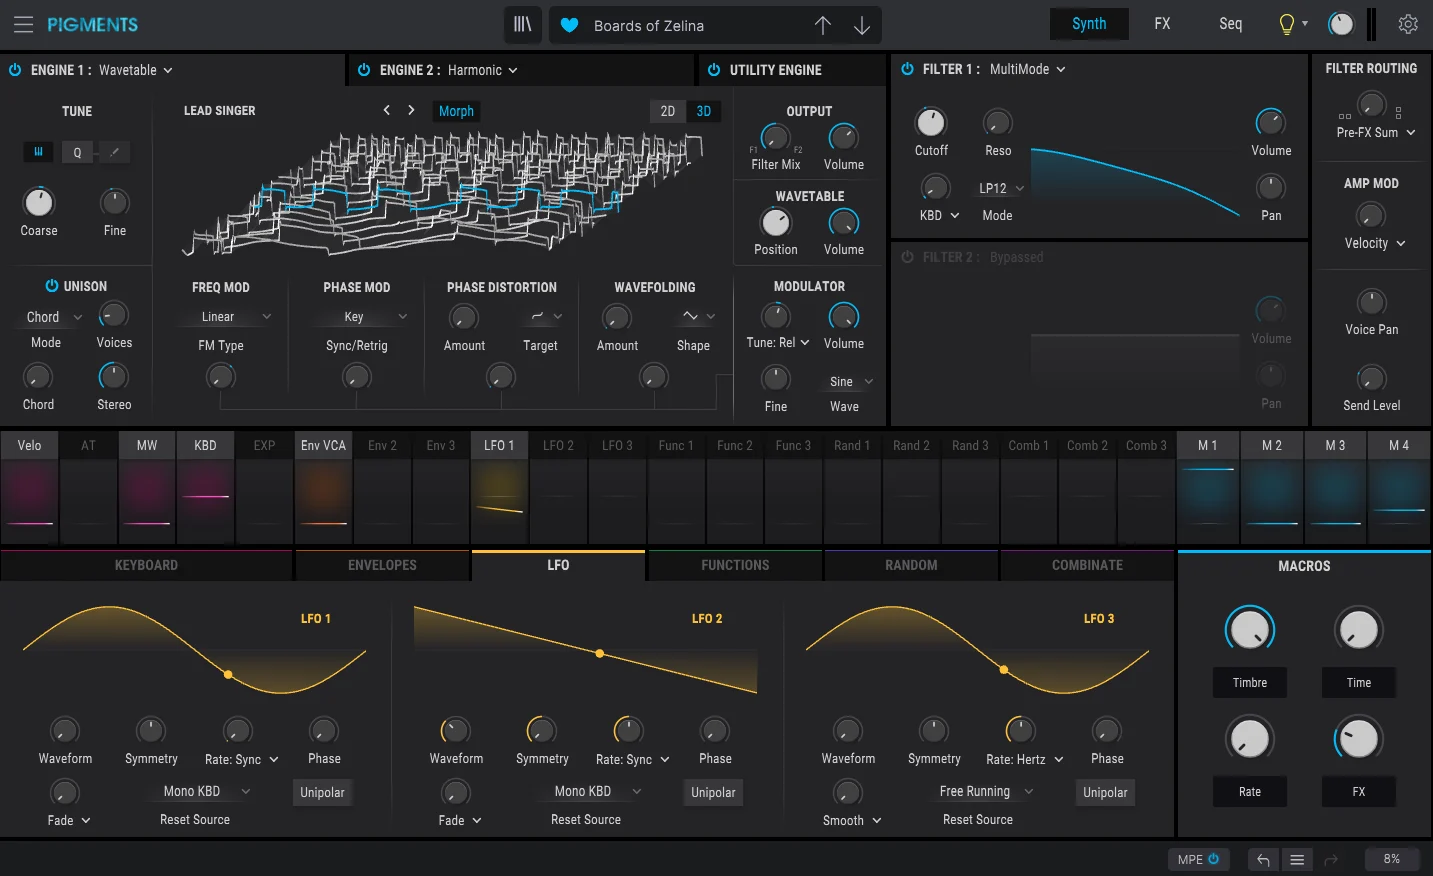 Arturia Pigments 3 synth view